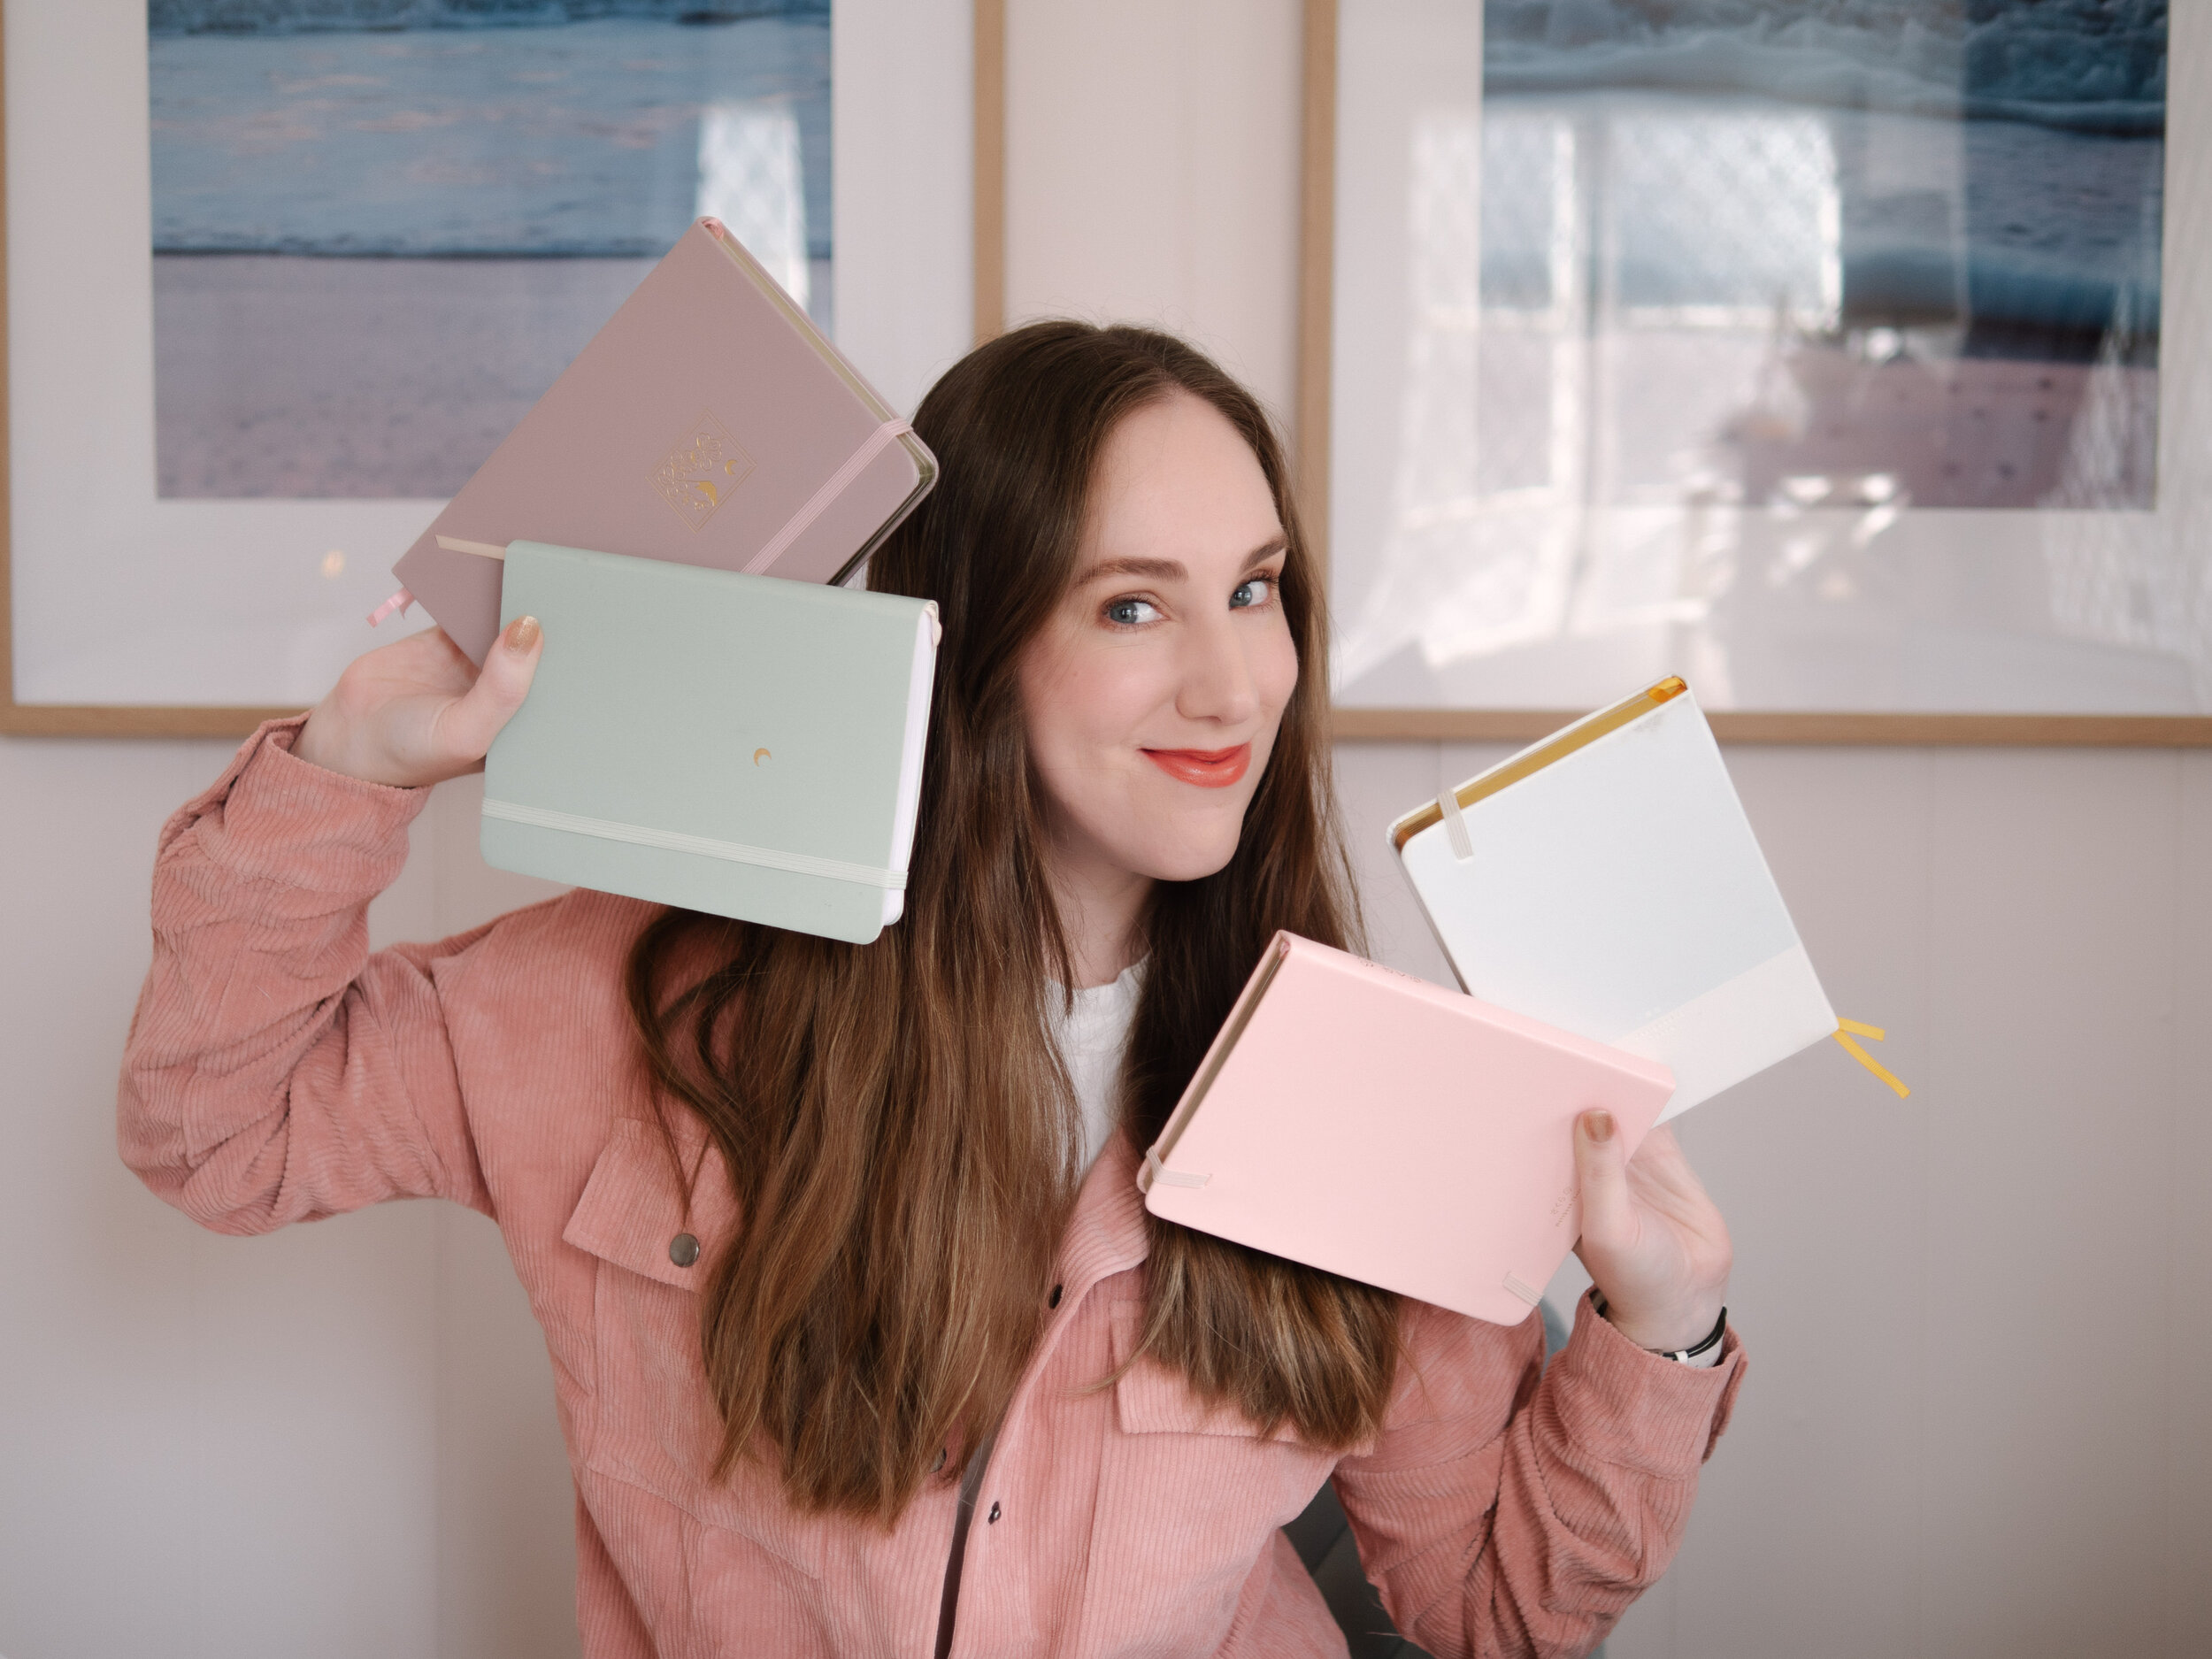 Notebook Therapy Tsuki Bullet Journal Review — Erin Smith - Bullet